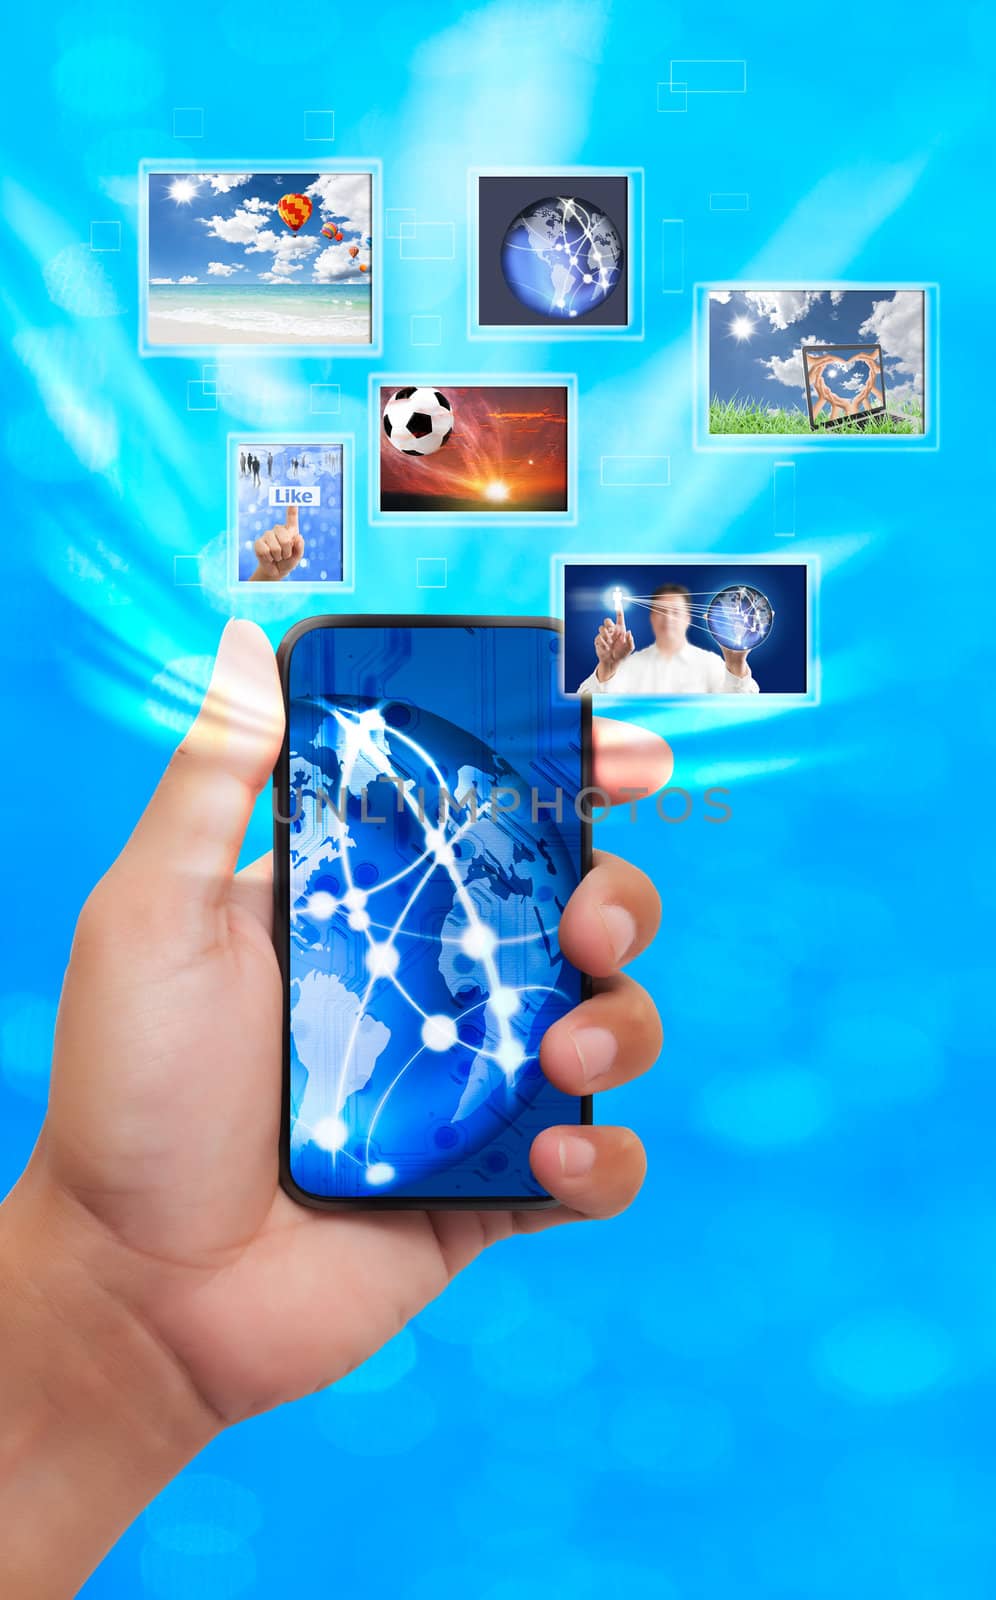 Touch screen mobile phone with streaming images